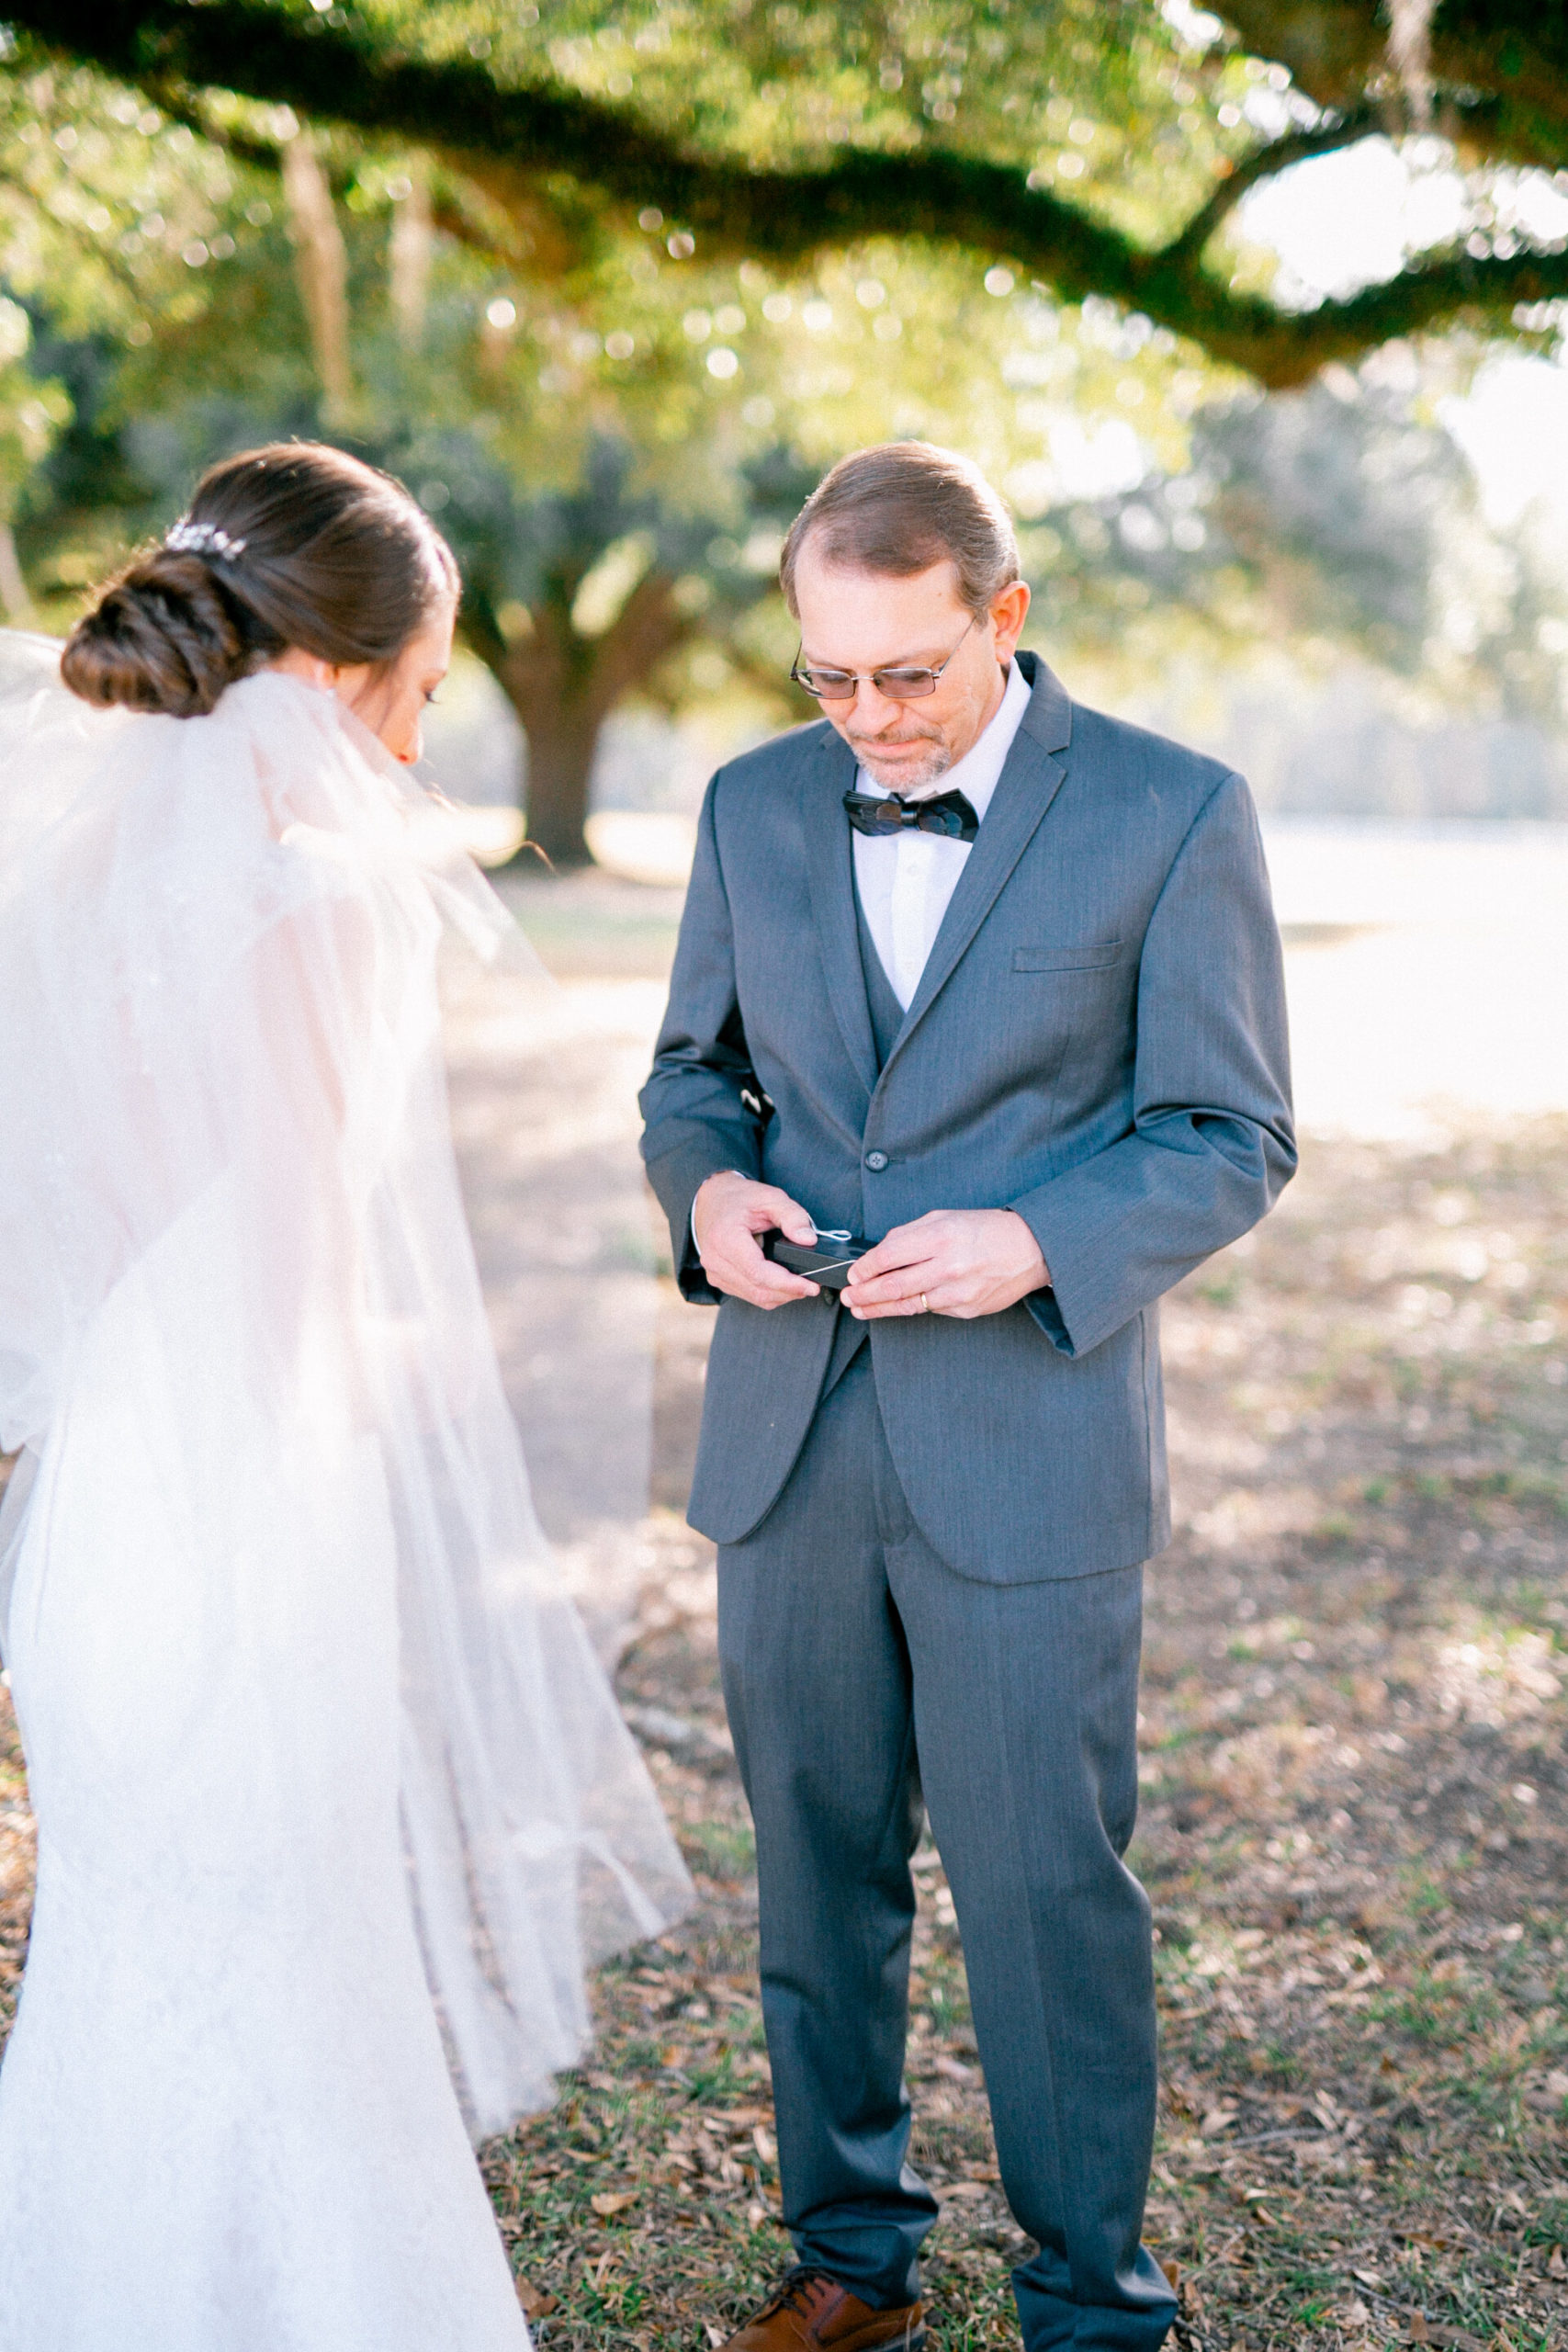 Bride shares a sweet moment with her father on her wedding day.